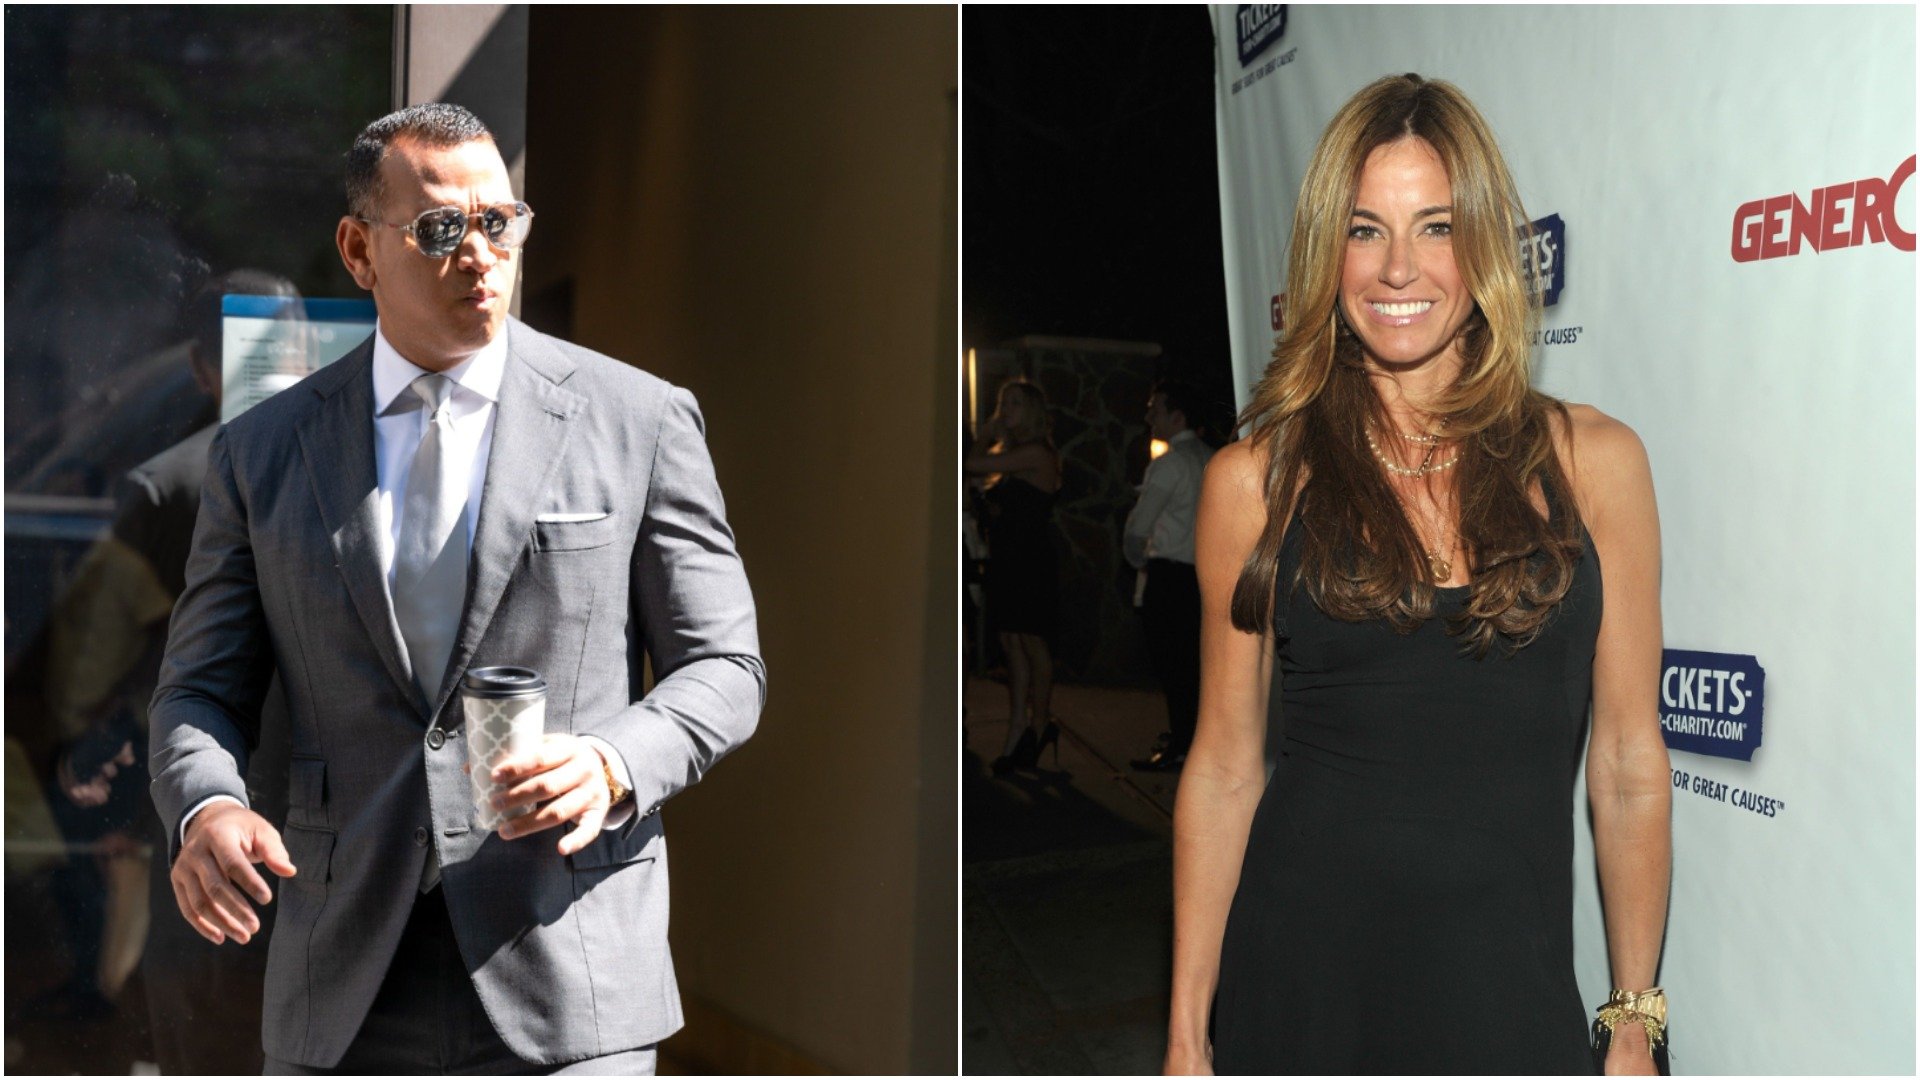 ‘RHONY’: Kelly Bensimon Says A-Rod Is ‘Amazing’ – Insists Relationship Is ‘Strictly Business’